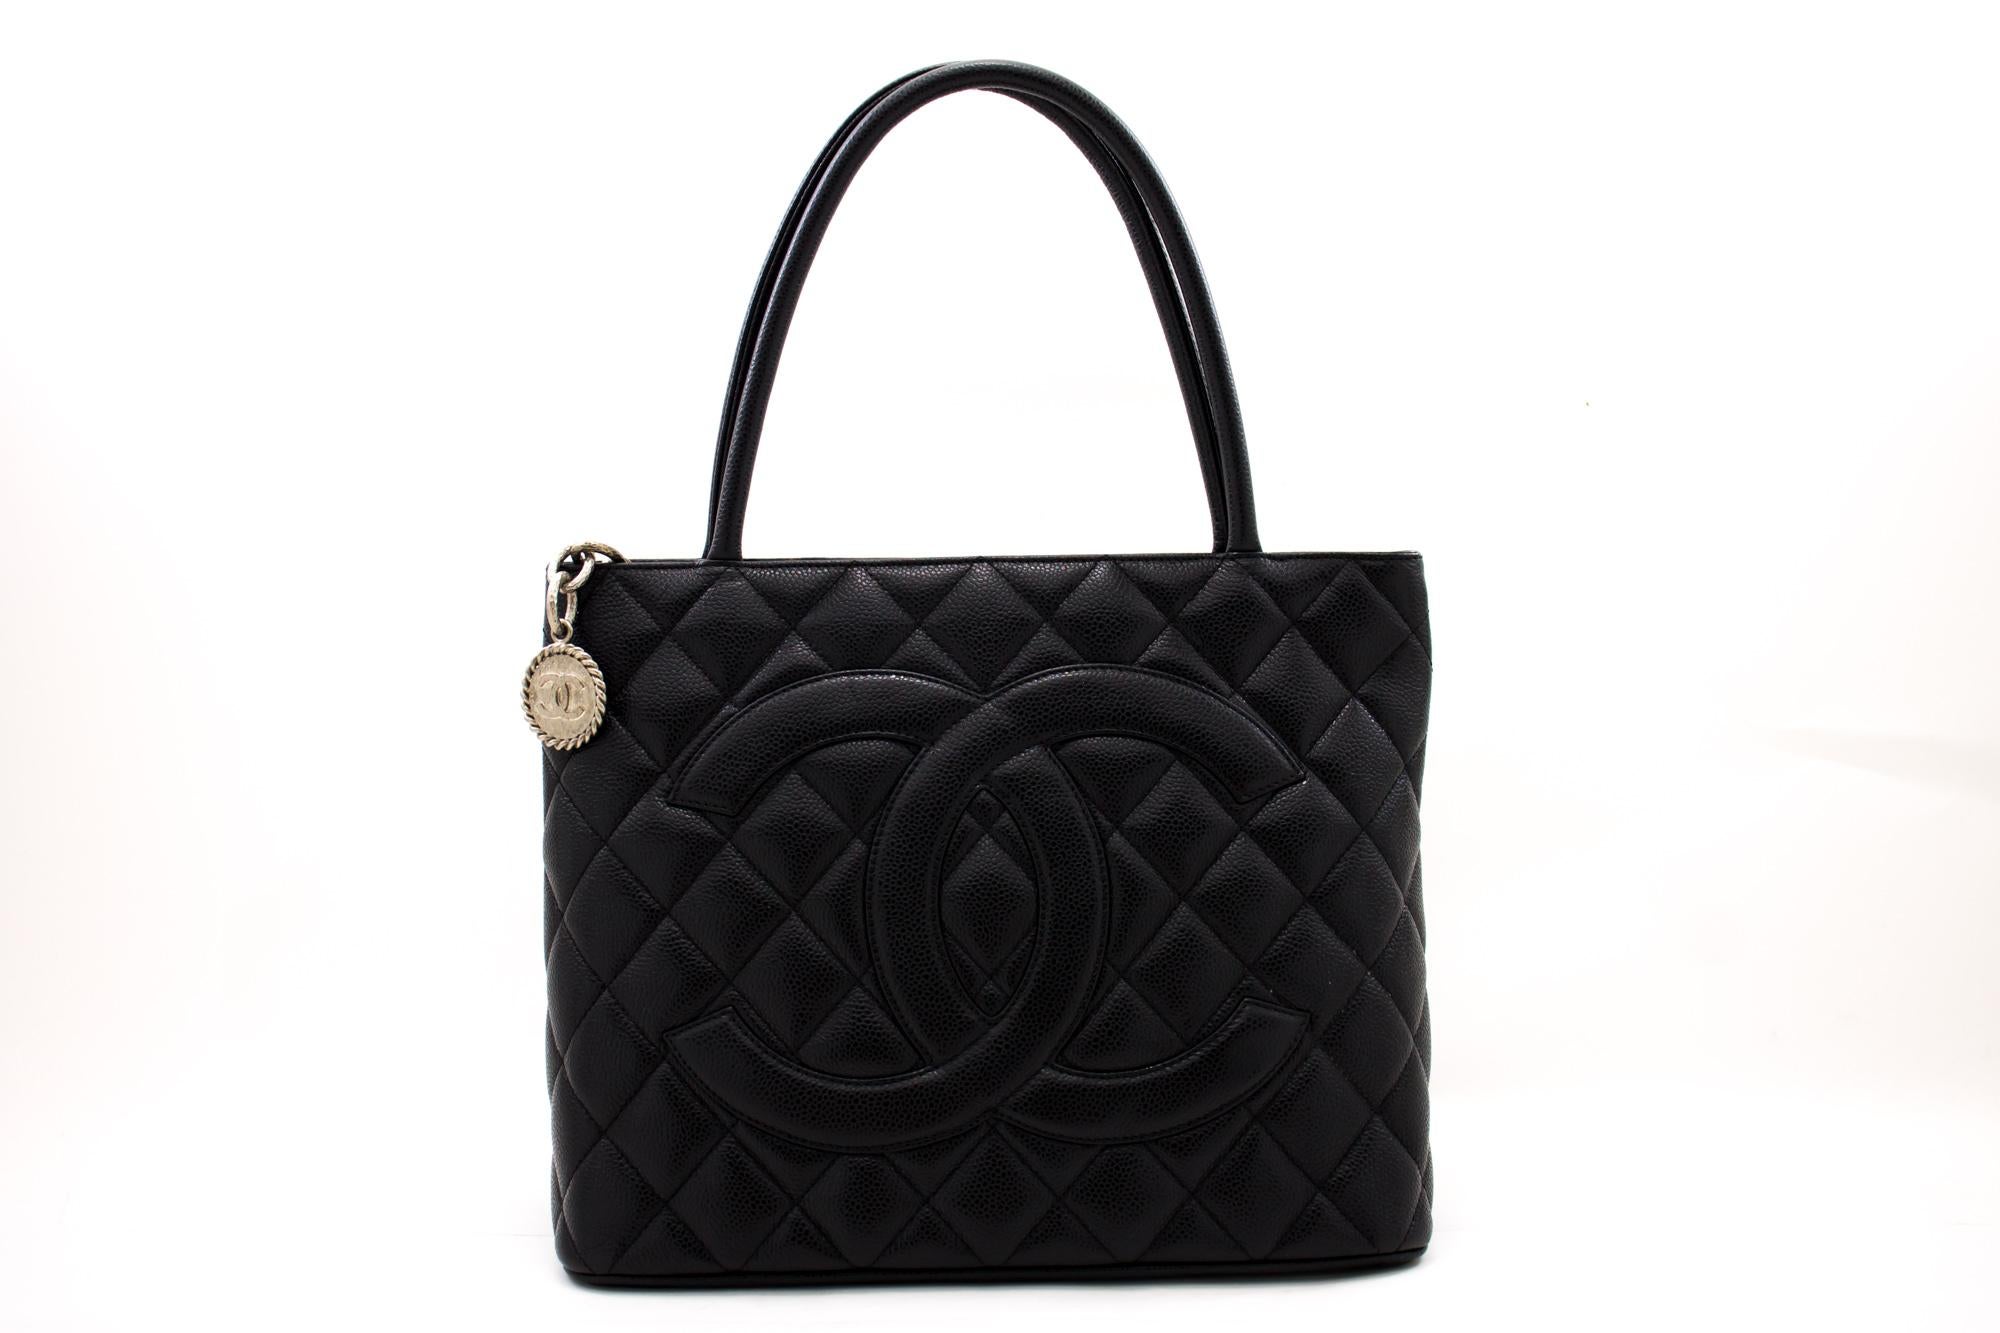 An authentic CHANEL Silver Medallion Caviar Shoulder Bag Shopping Tote Black. The color is Black. The outside material is Leather. The pattern is Solid. This item is Contemporary. The year of manufacture would be 2 0 0 1 .
Conditions &